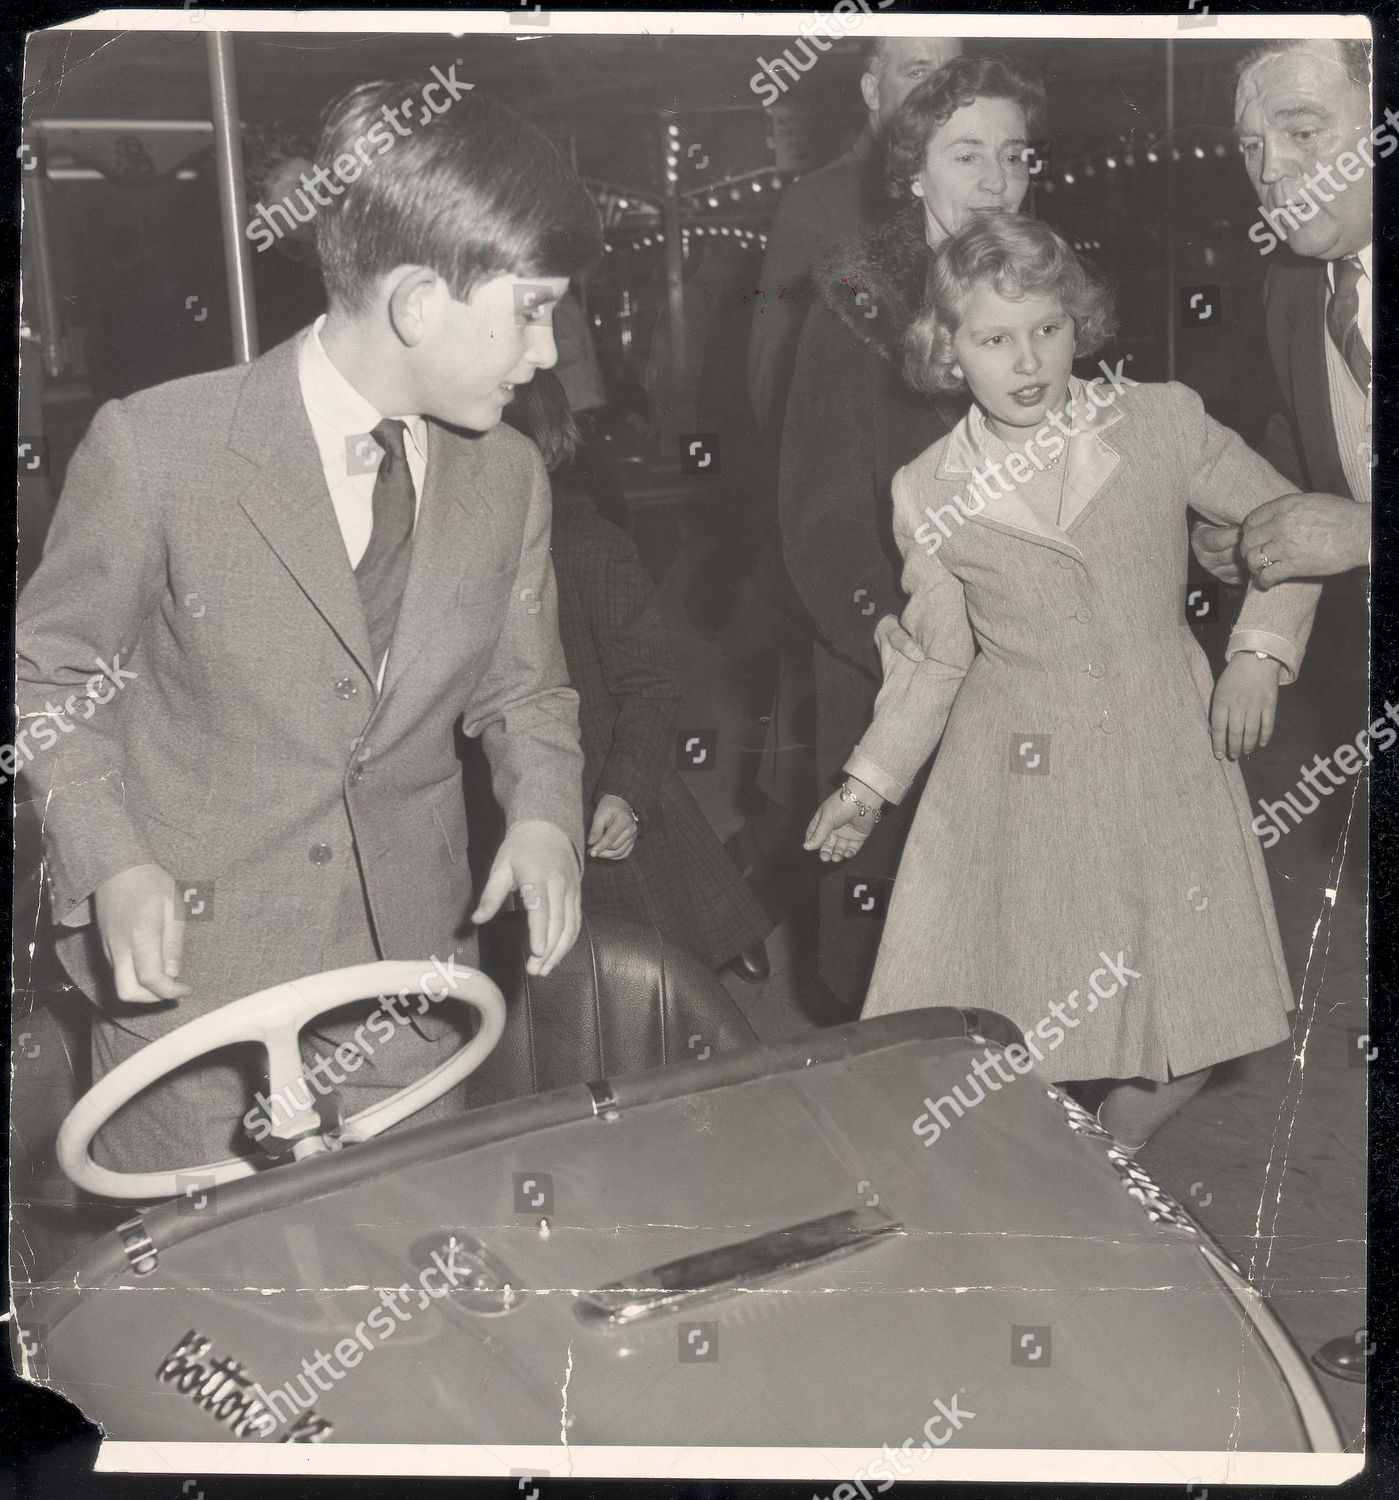 prince-charles-prince-of-wales-december-1959-a-helping-hand-for-the-princess-at-the-dodgems-first-it-was-the-dodgems-then-the-ghost-train-for-the-prince-of-wales-and-princess-anne-it-was-a-day-of-fun-and-laughter-fun-at-olympias-fair-after-shutterstock-editorial-1049852a.jpg